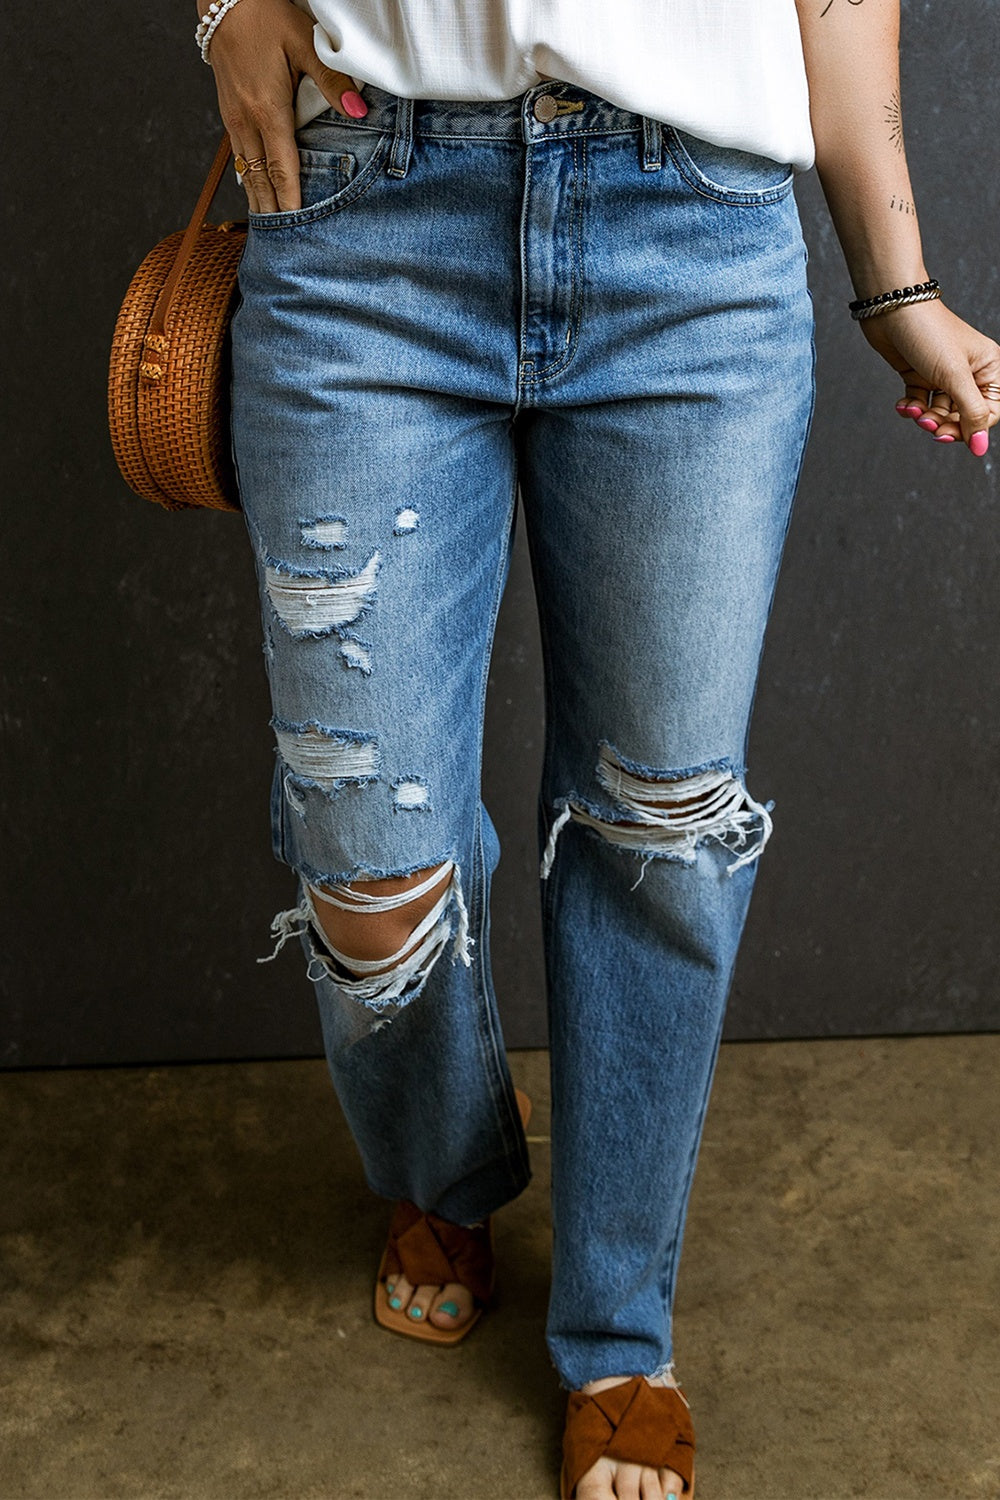 Trendy Distressed Raw Hem Denim Jeans with Convenient Pockets - Ideal for Casual Chic Looks!